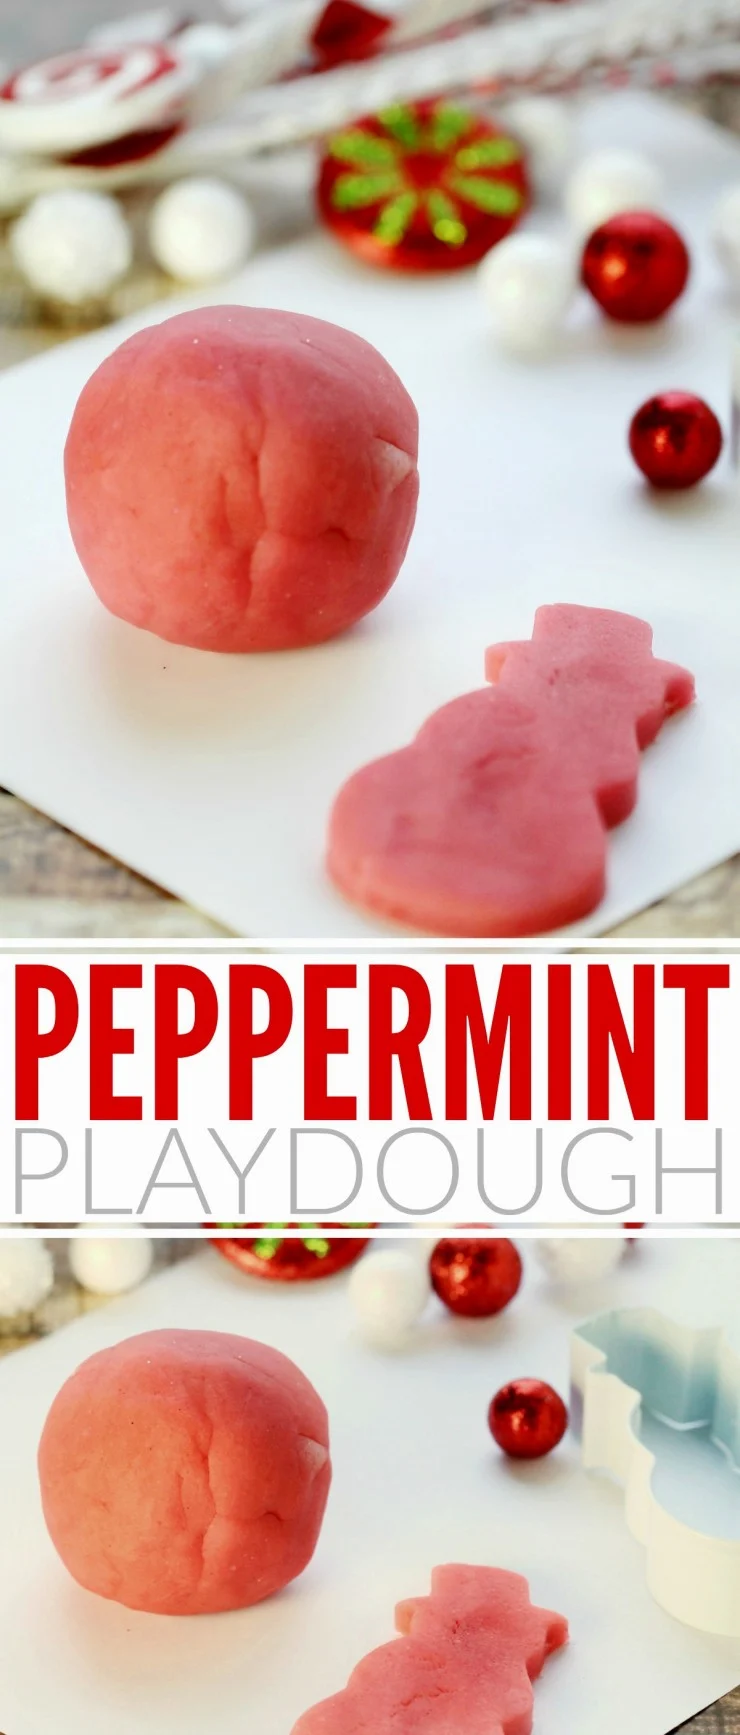 This Peppermint Playdough recipe is not only edible, it also smells great too! Kids will love playing with this fun scented homemade playdough!